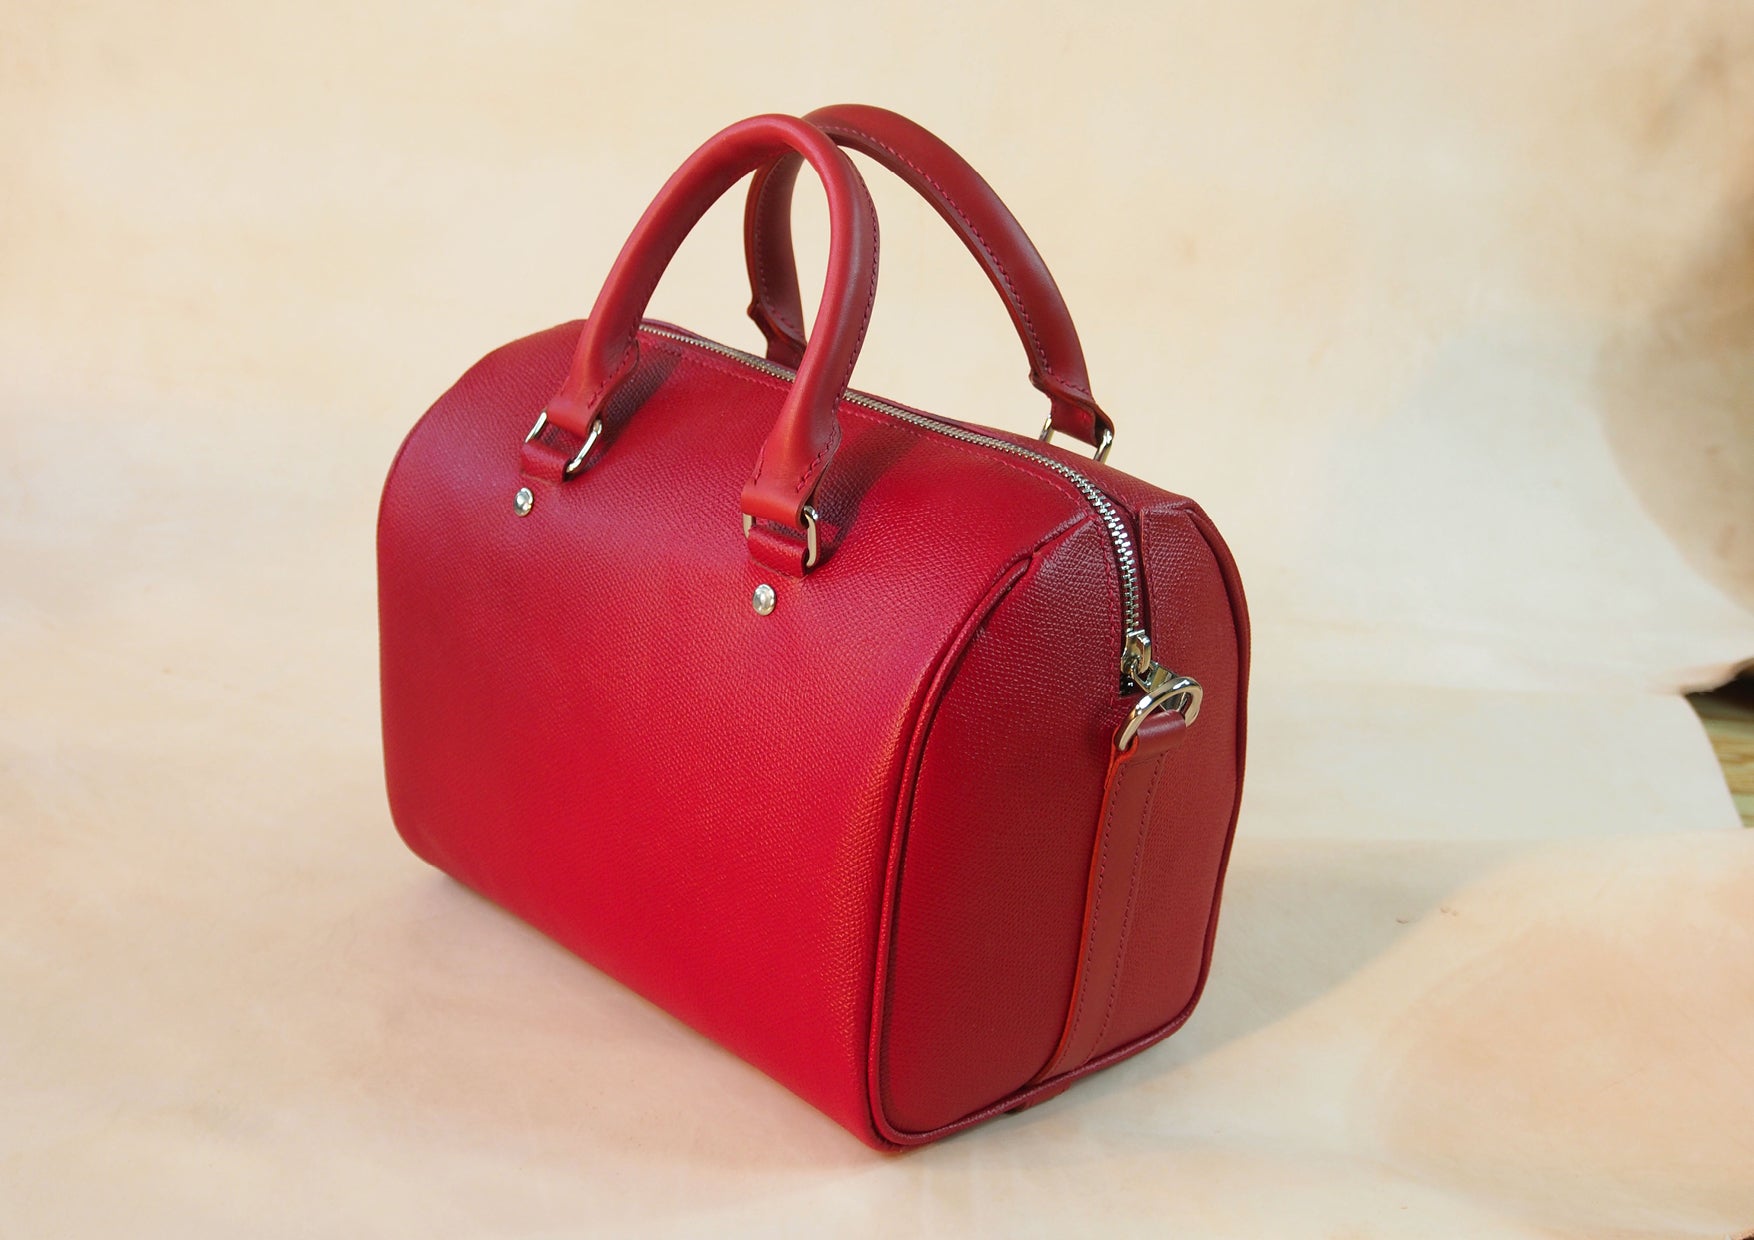 New Leather Bag Pattern/ Speedy Bag Pattern Available